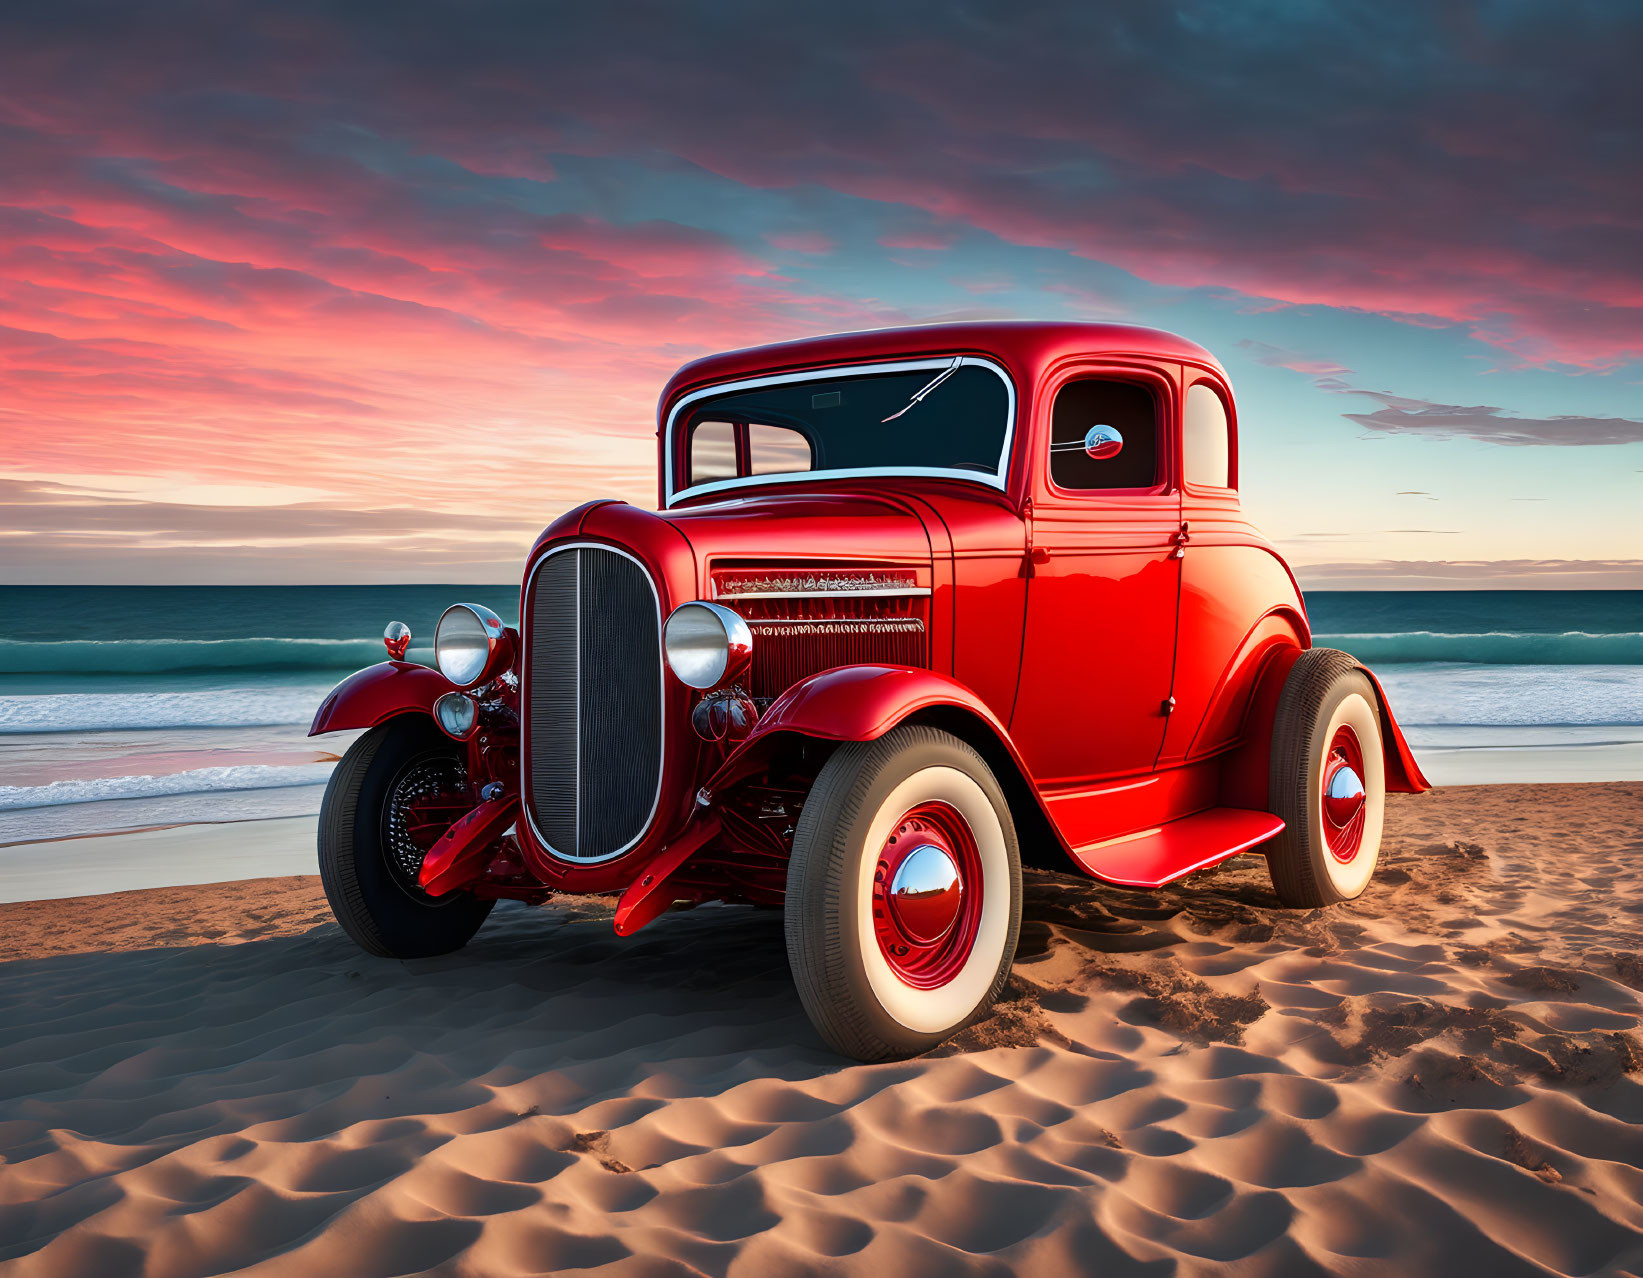 Red vintage car on sandy beach at sunset